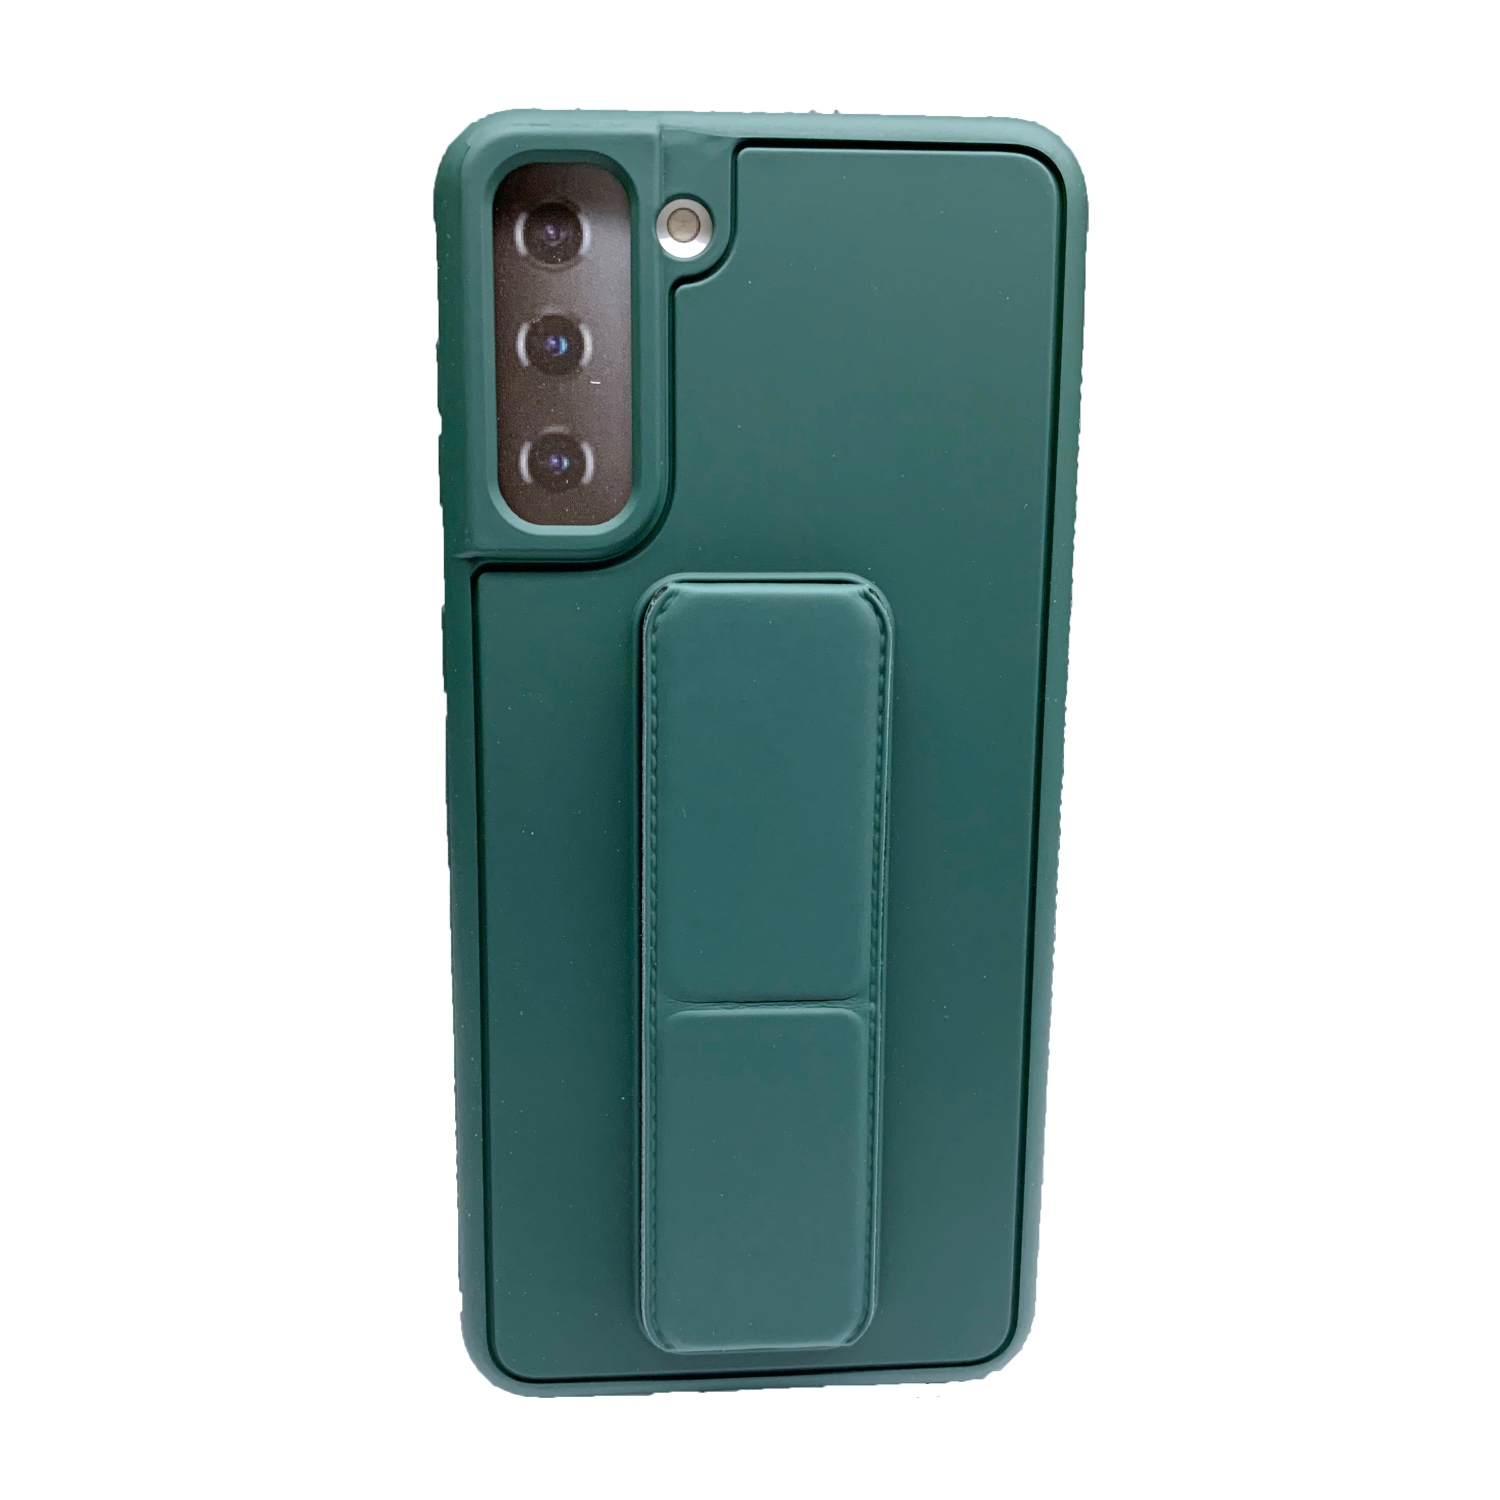 TopSave Vertical&Horizontal Kickstand Hand Wrist Strap Foldable Magnetic Stand Shockproof Protective Phone Case For Samsung S21 Plus, Army Green